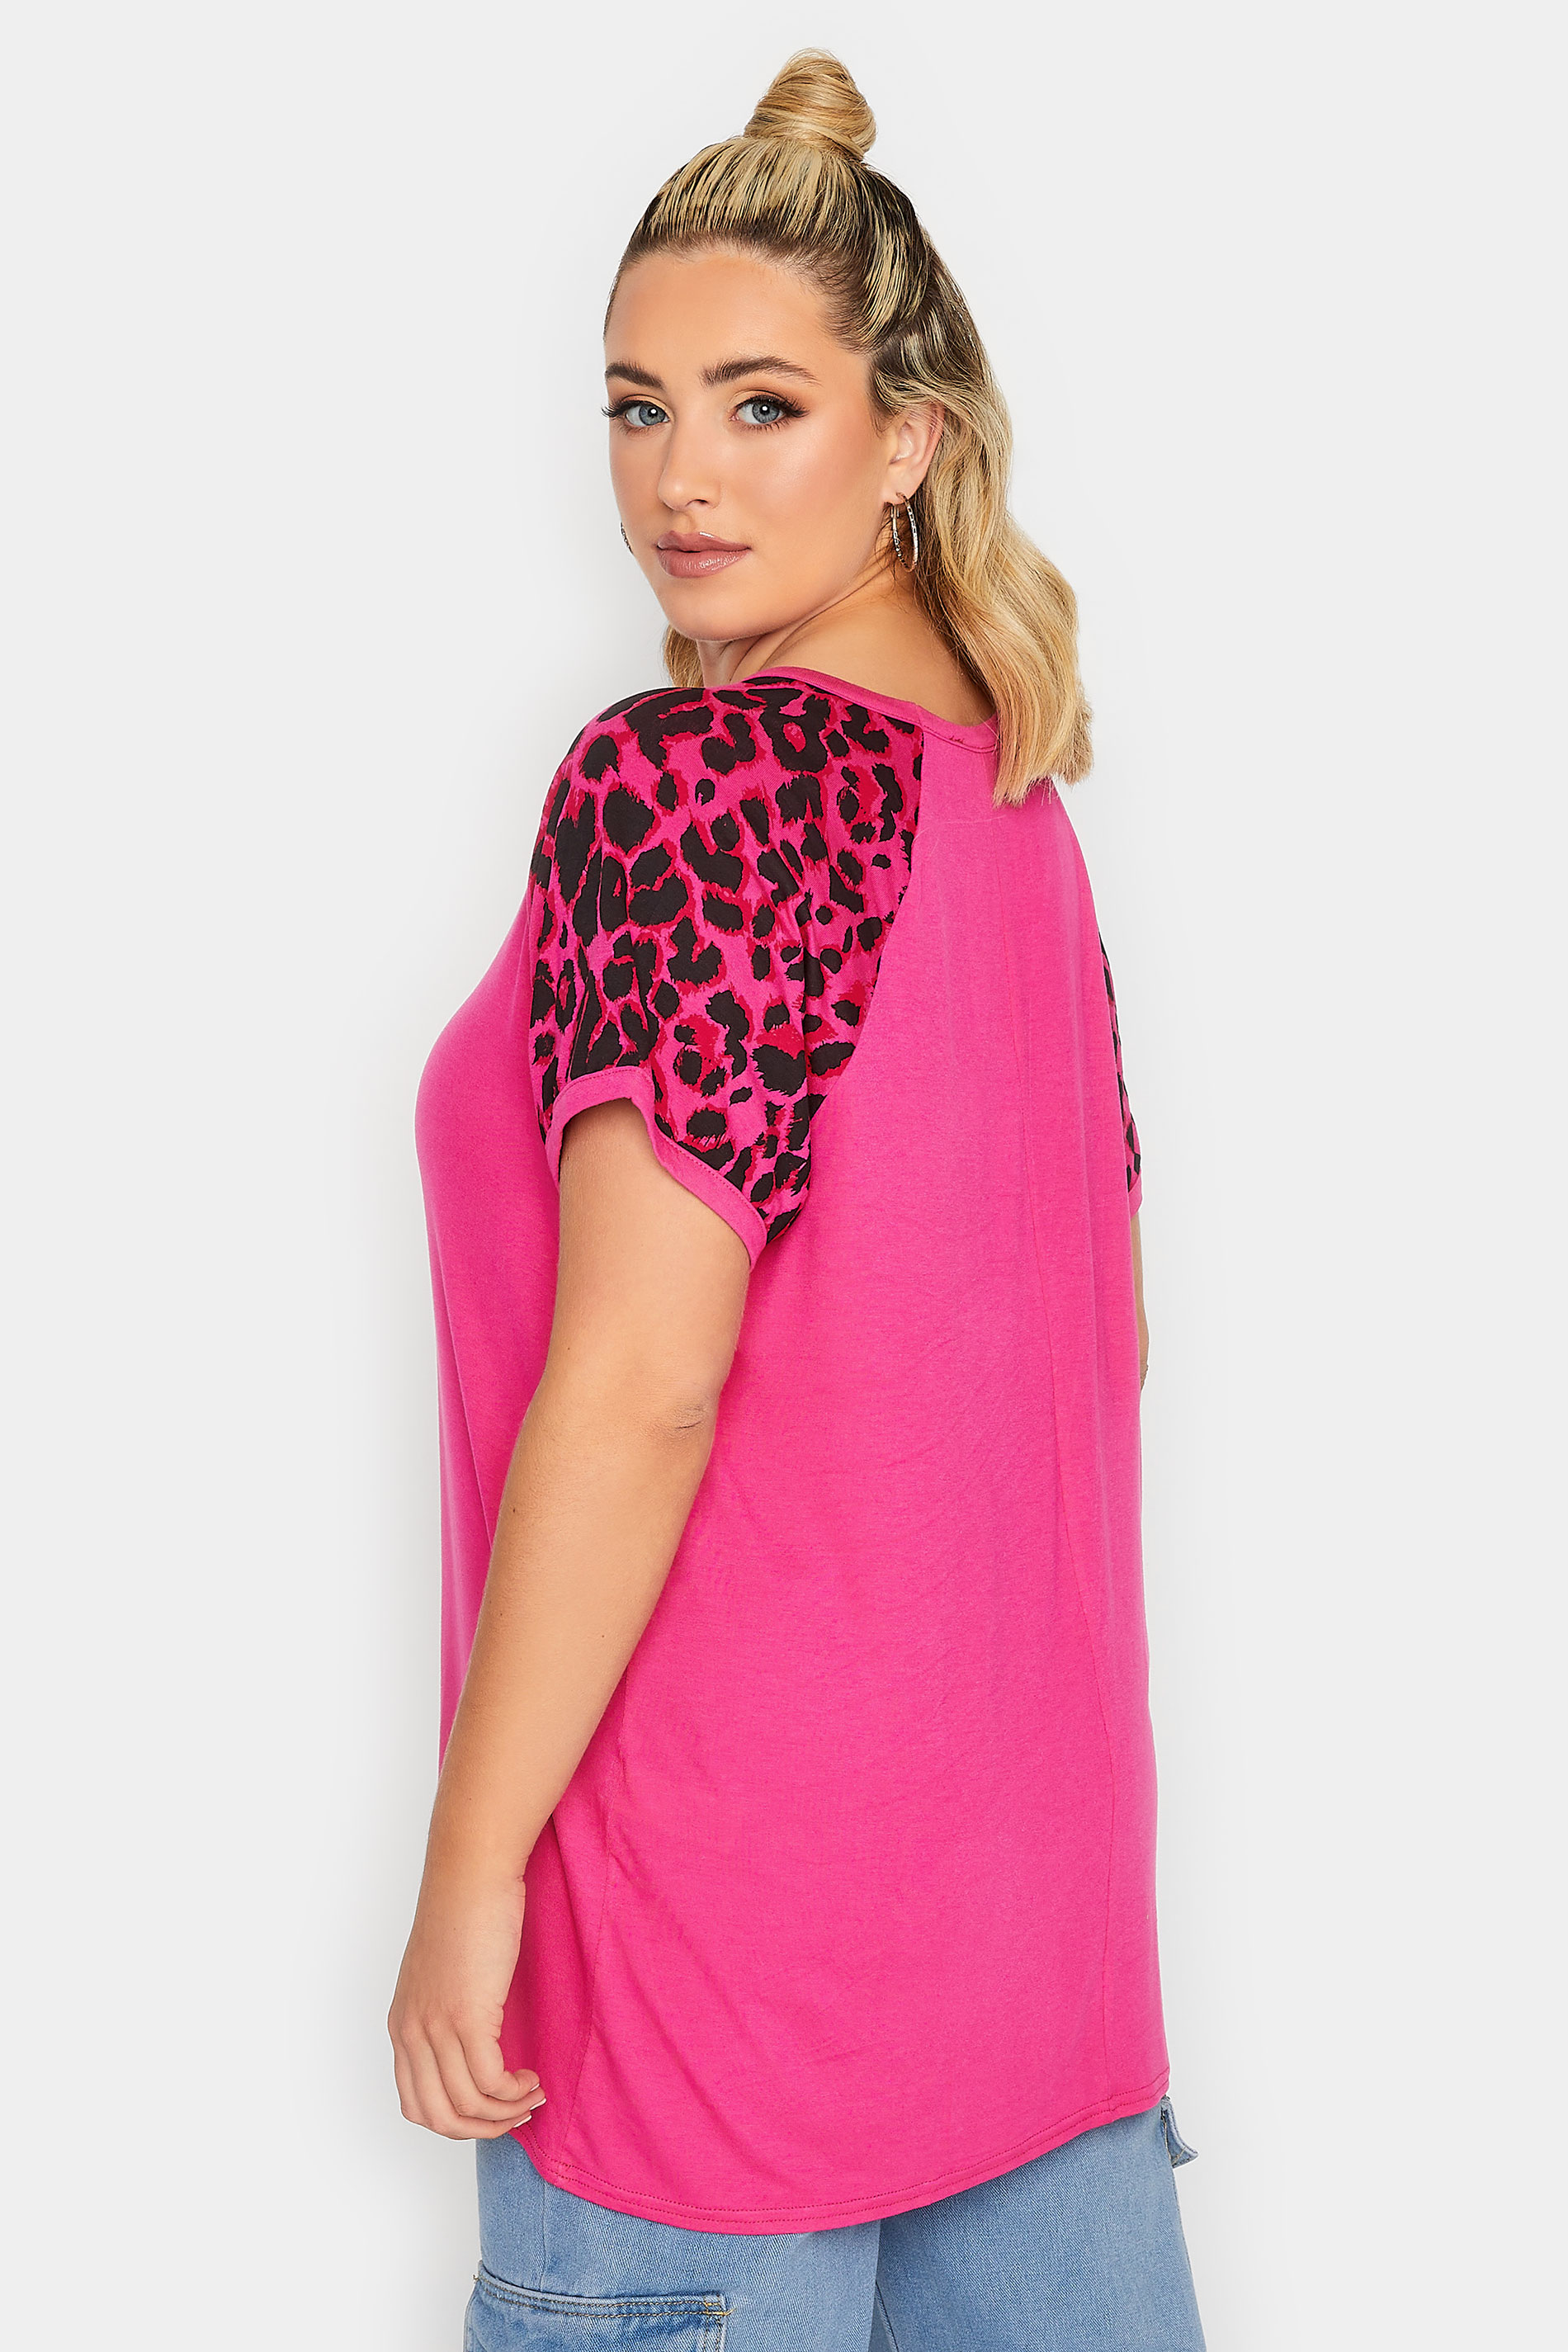 LIMITED COLLECTION Plus Size Hot Pink Leopard Print Short Sleeve T-Shirt | Yours Clothing  3